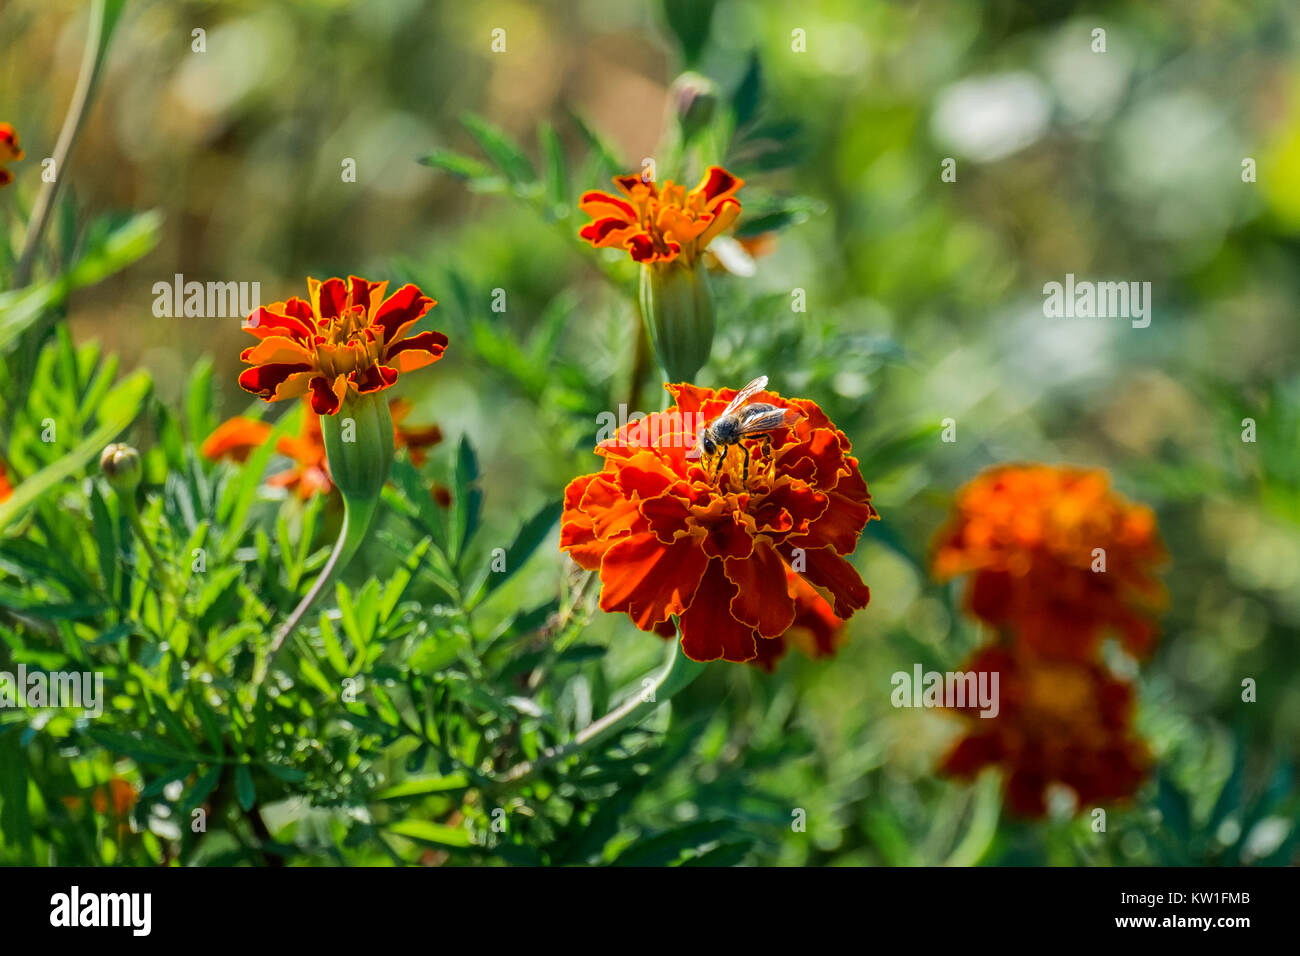 Orange flowers of a marigold and a bee collecting pollen (Tagetes patula) Stock Photo